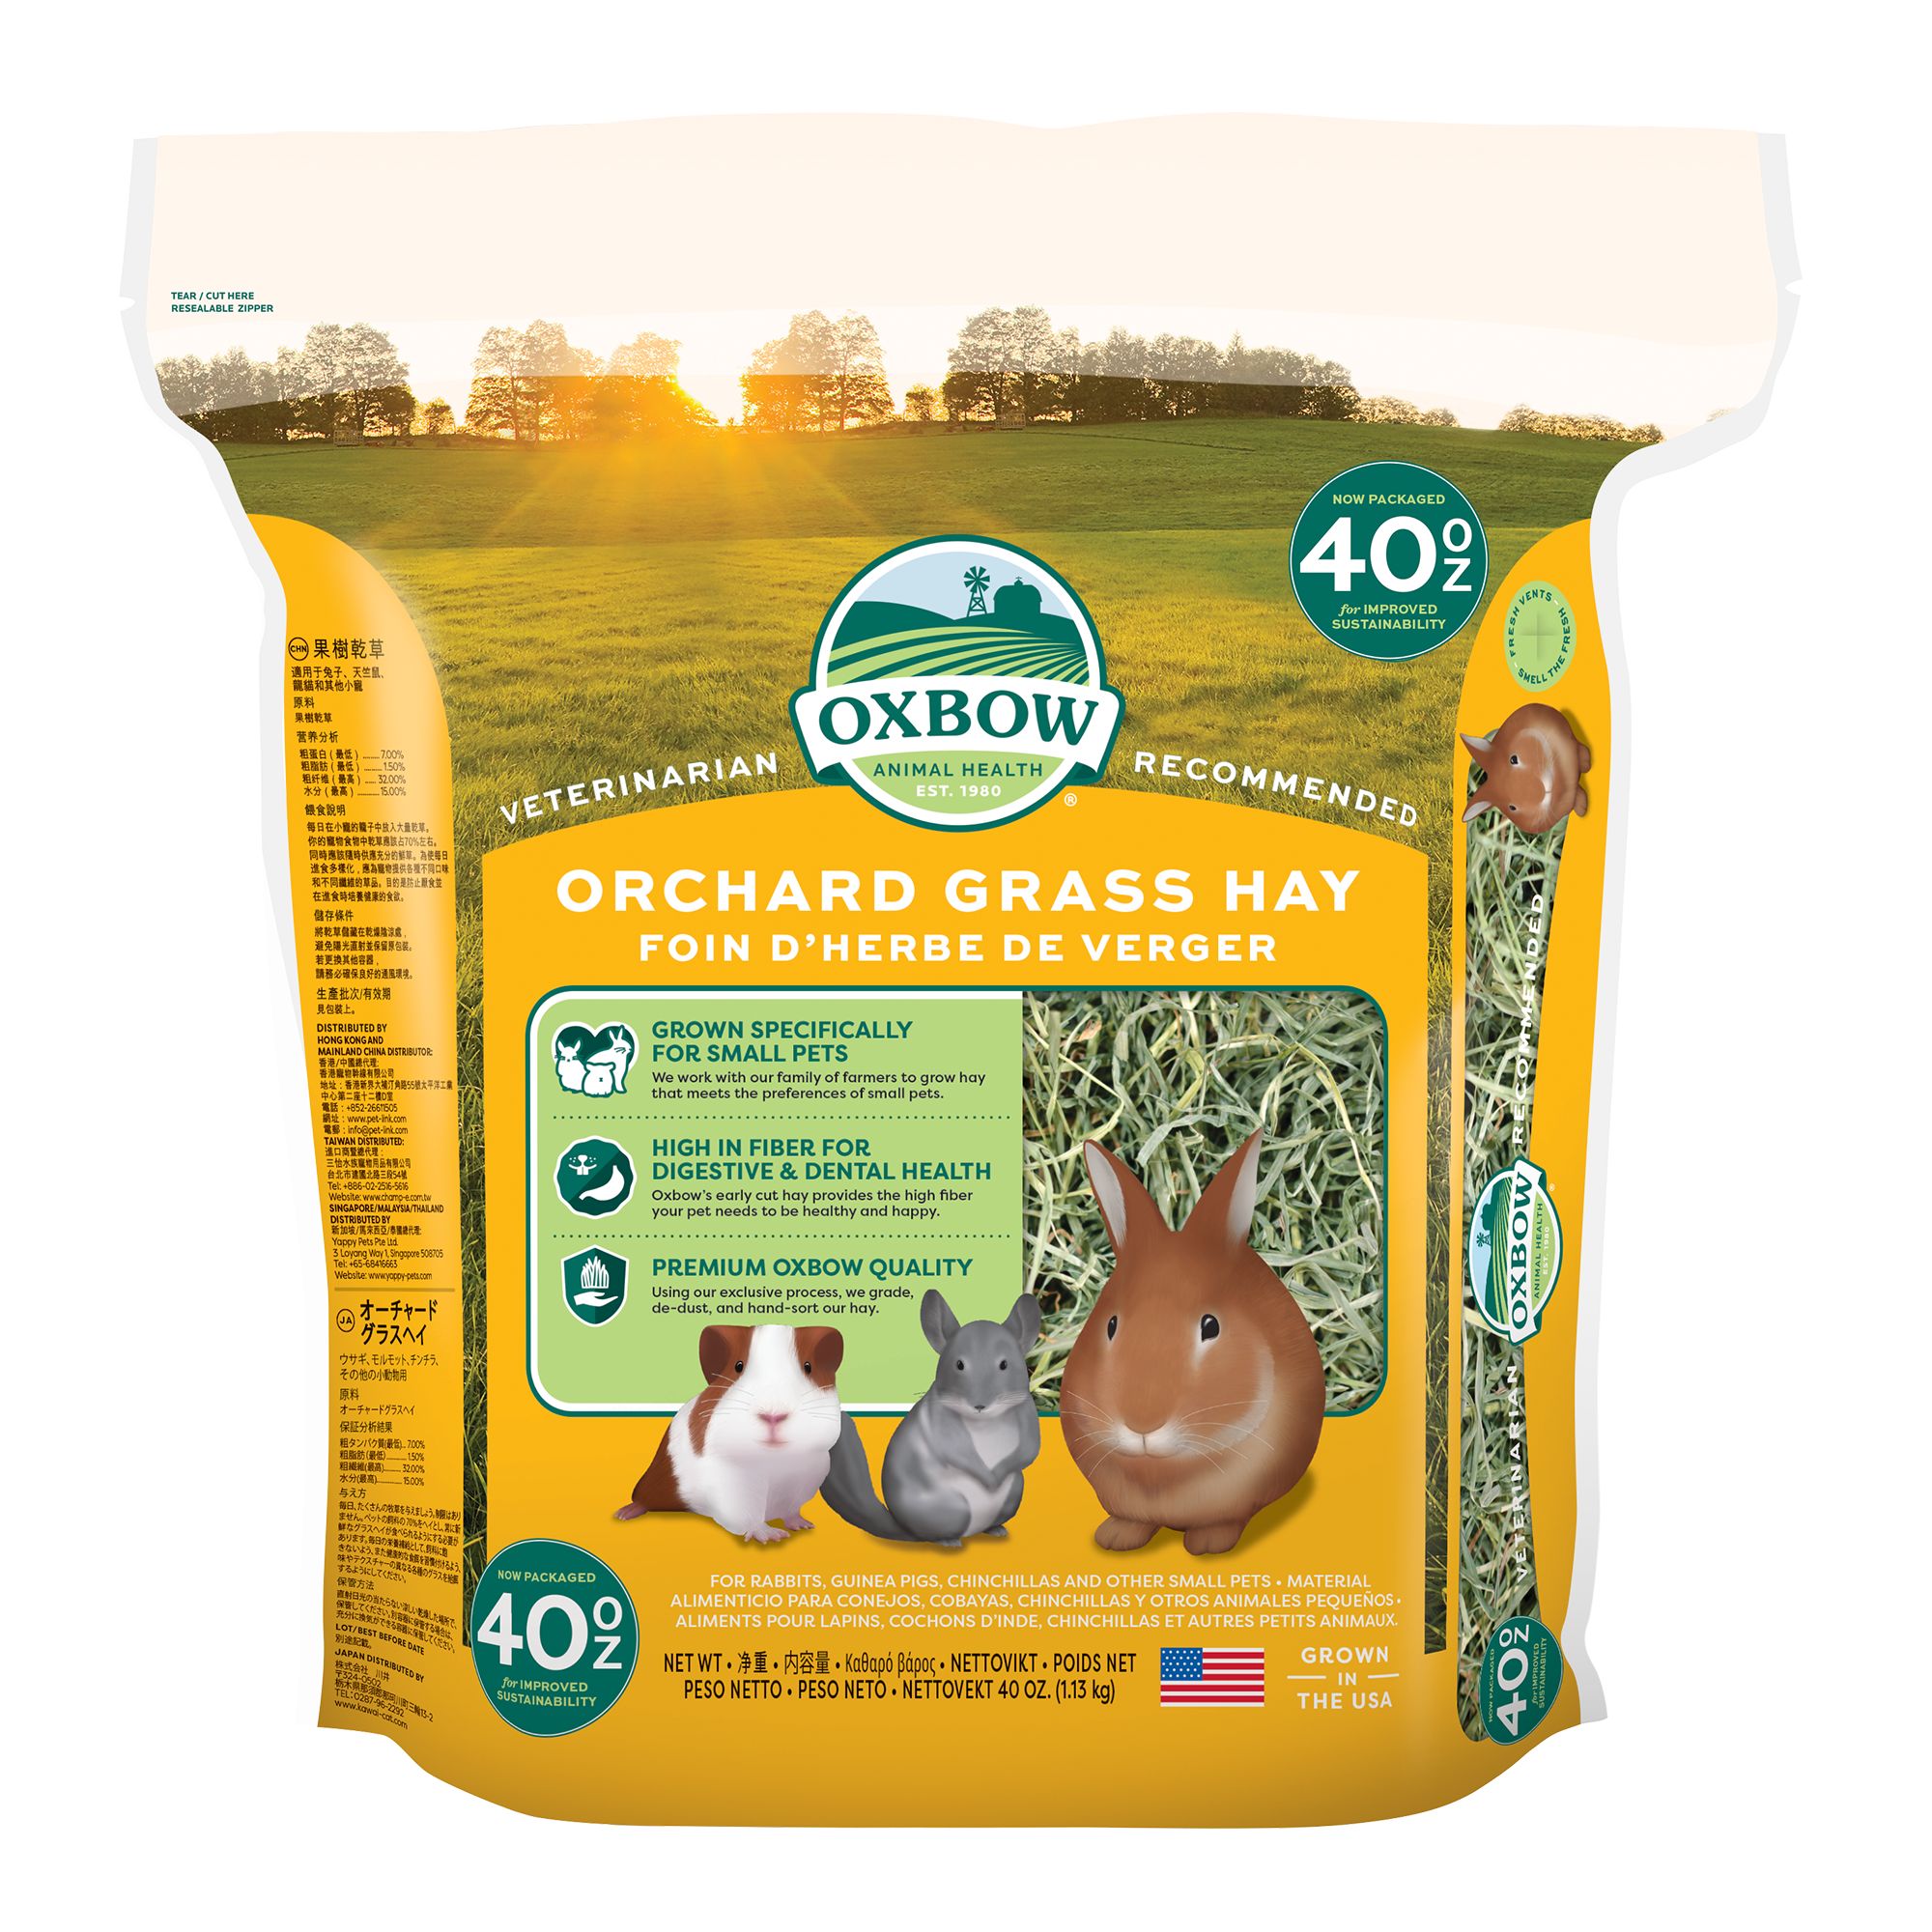 Oxbow BENE Terra Orchard Grass Hay 15 Oz Bag for Small Pets for sale online 